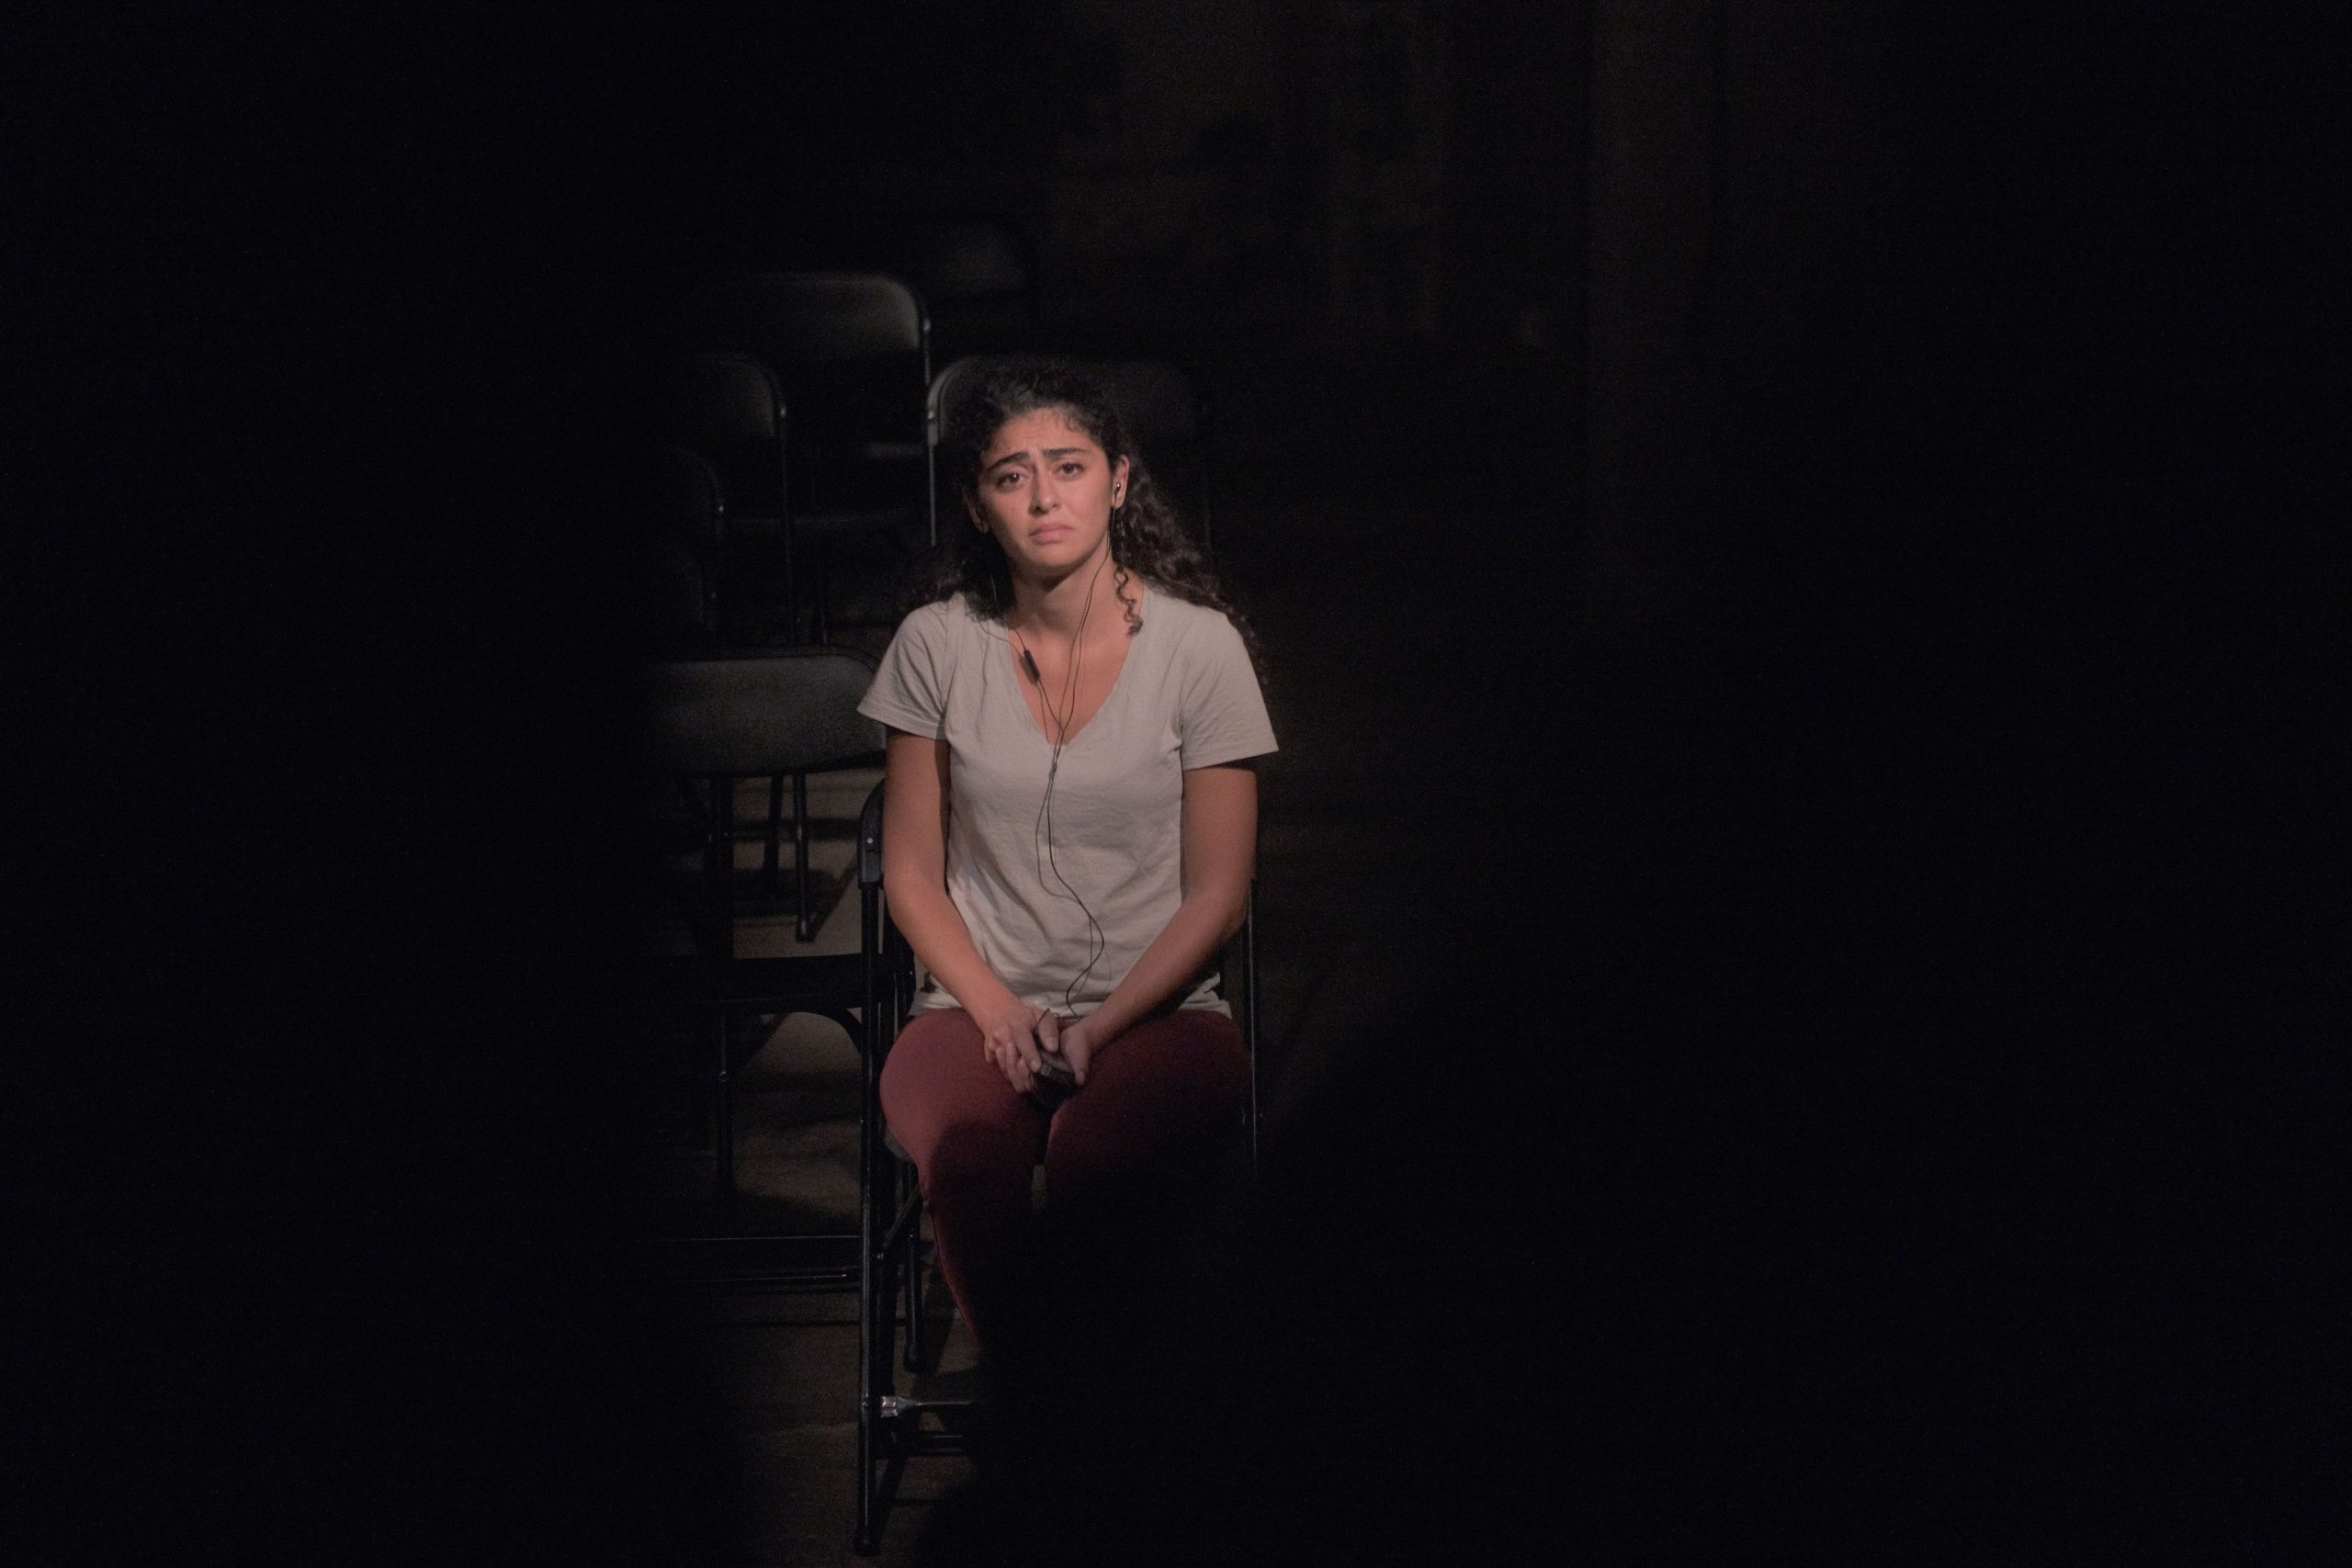 Performing No Demand No Supply: A Re-reading of Lebanon’s 2016 Sex Trafficking Scandal,” a documentary theatre performance under the patronage of the AUB Theater Initiative and in collaboration with NGO KAFA. (Nataly Hindaoui)